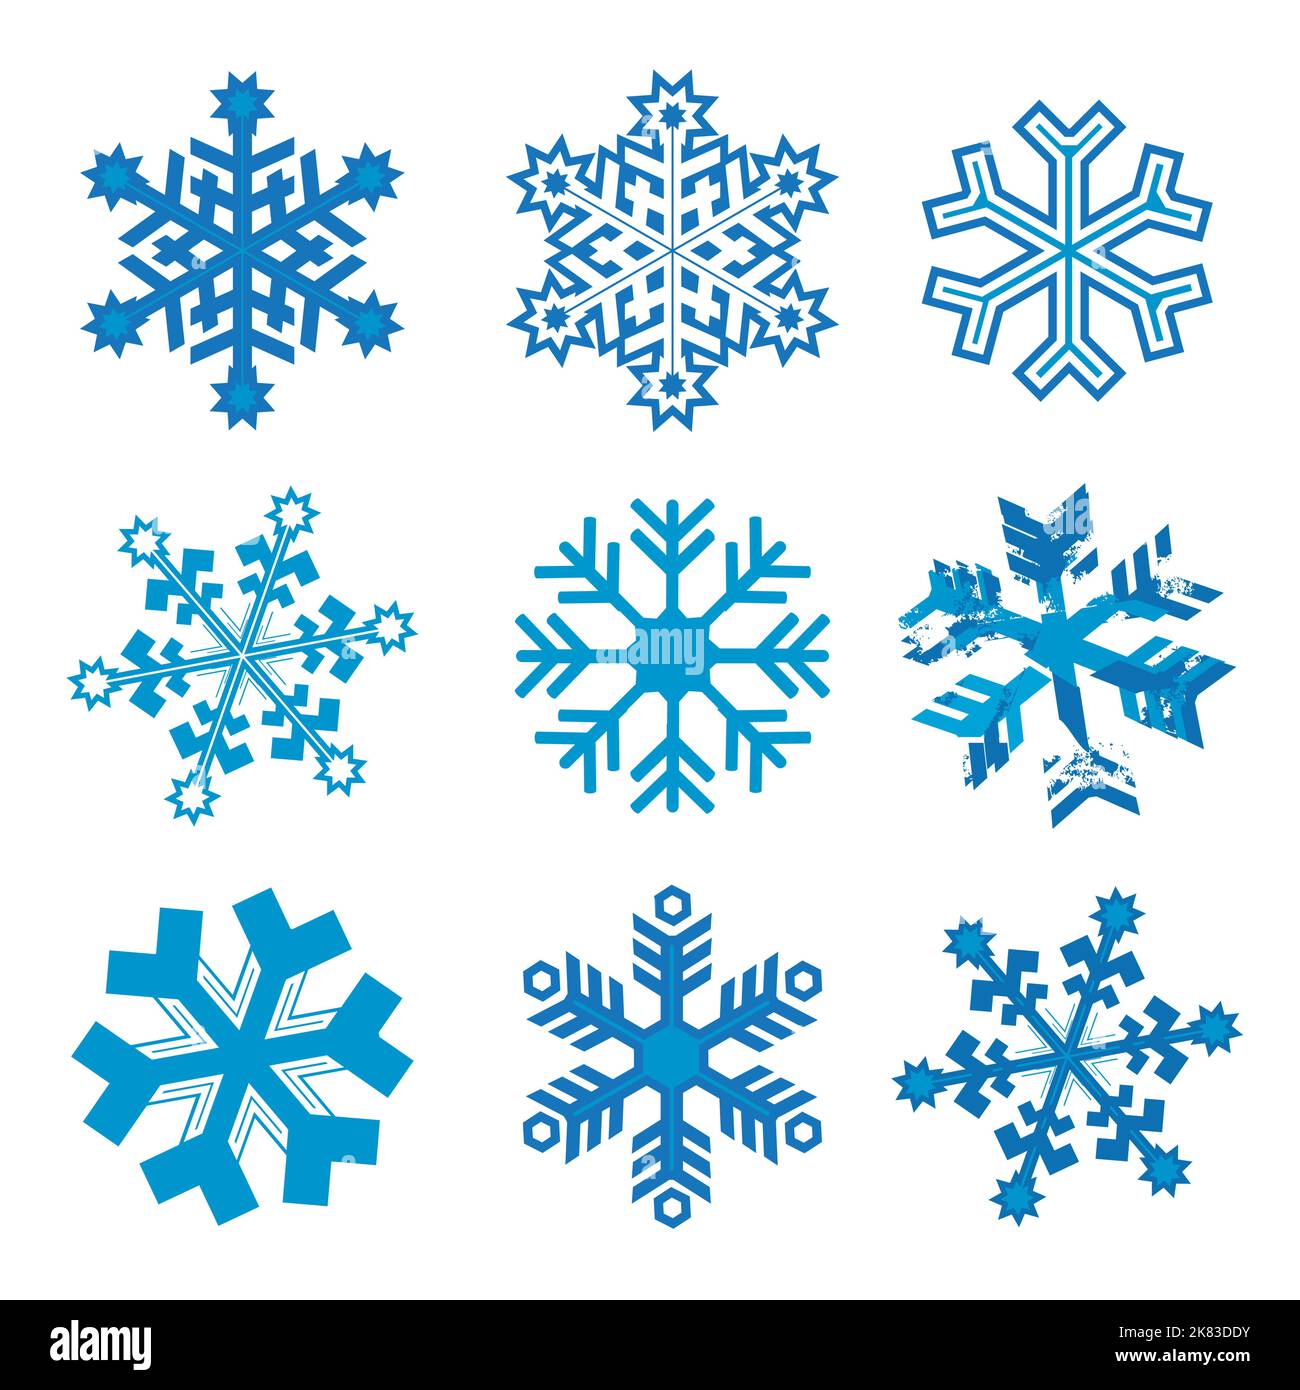 Snowflakes, abstract icons set. Illustration of nine blue decorative ice crystals. Isolated on white background. Vector available. Stock Vector